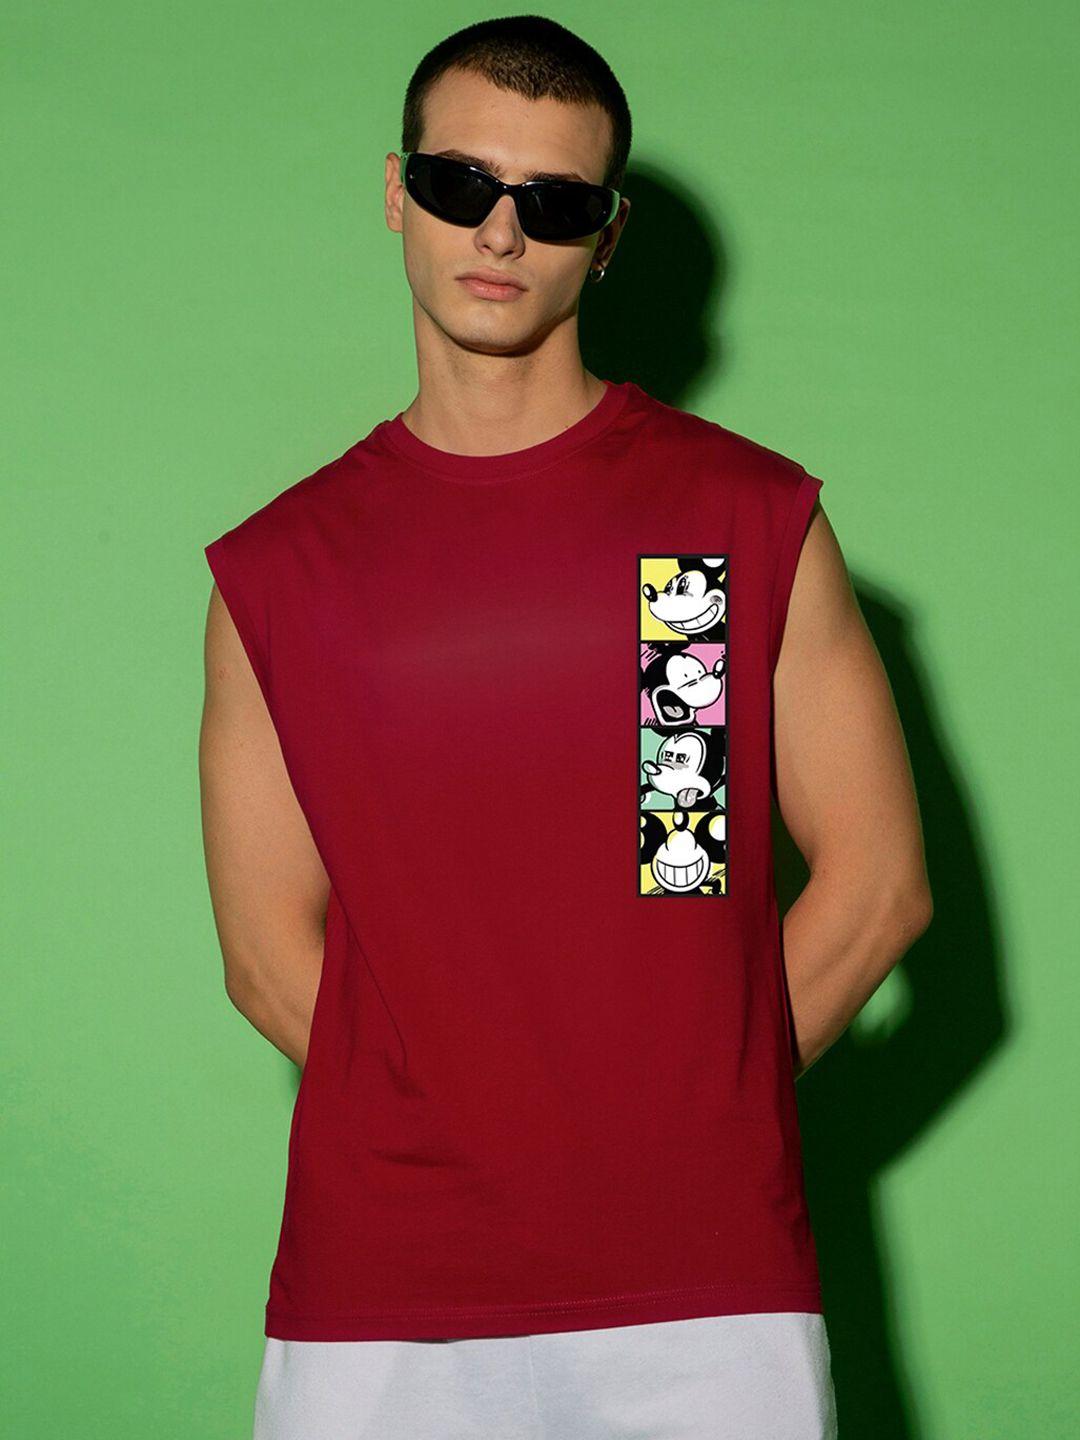 bewakoof-red-mickey-mouse-printed-boxy-fit-sleeveless-pure-cotton-gym-vest-605665